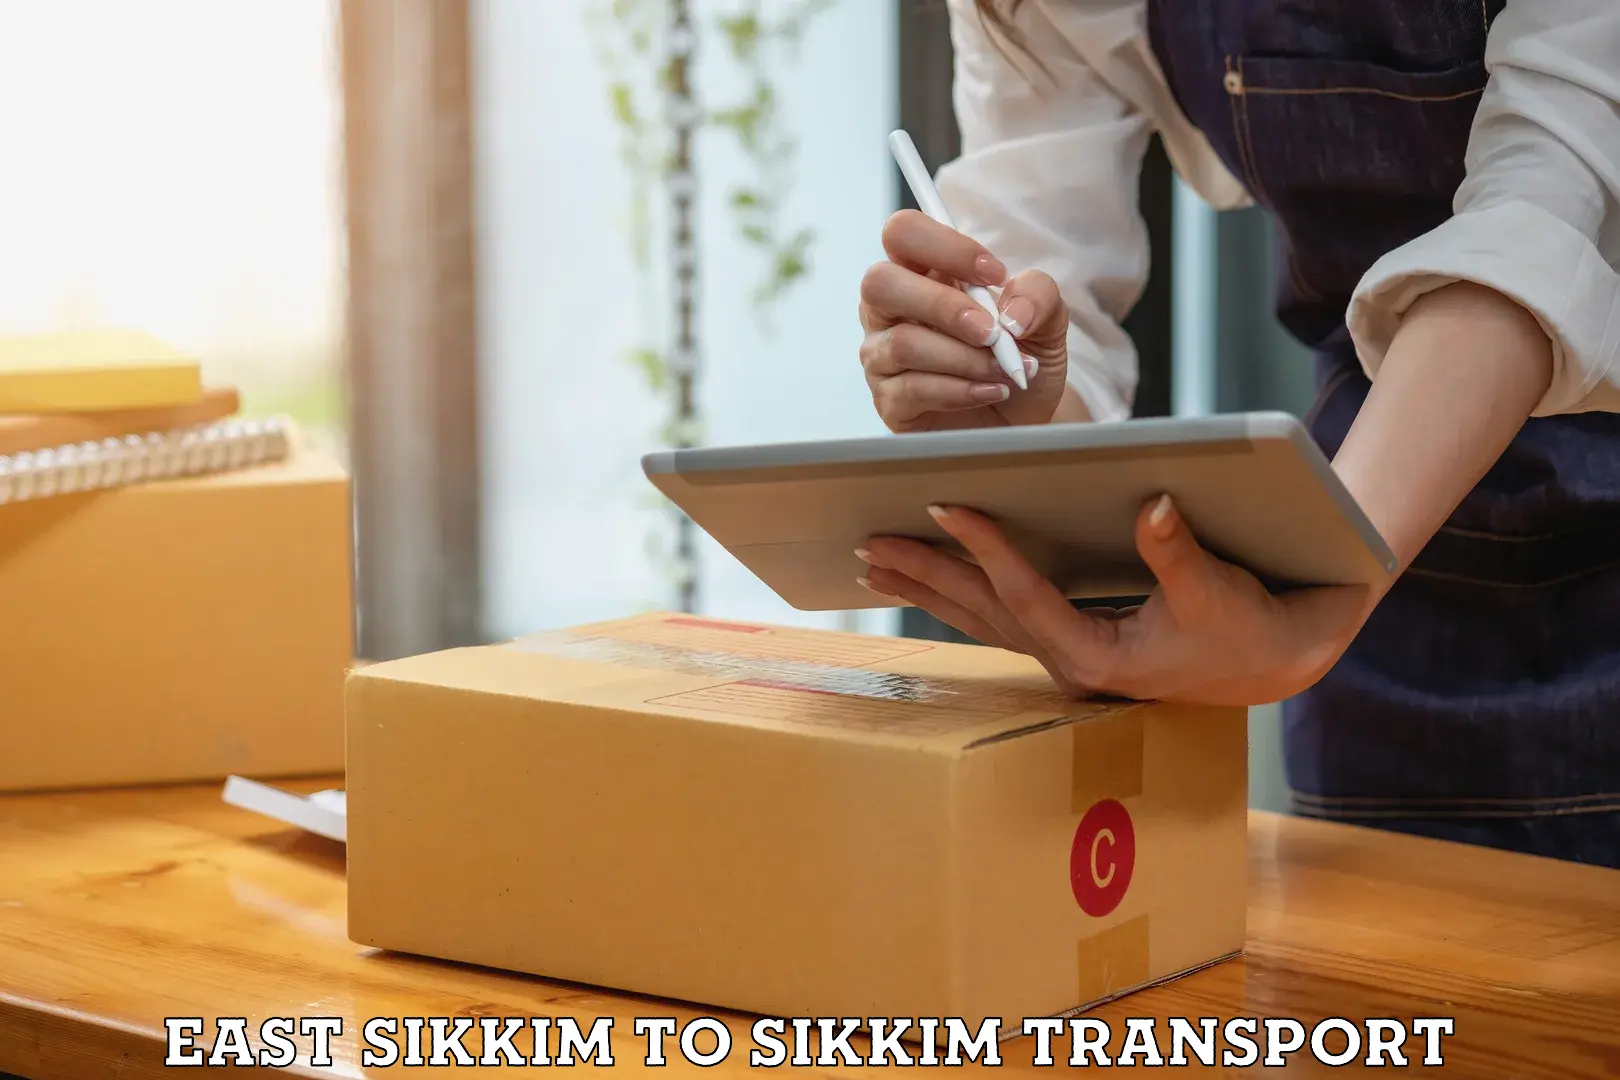 Online transport service East Sikkim to North Sikkim